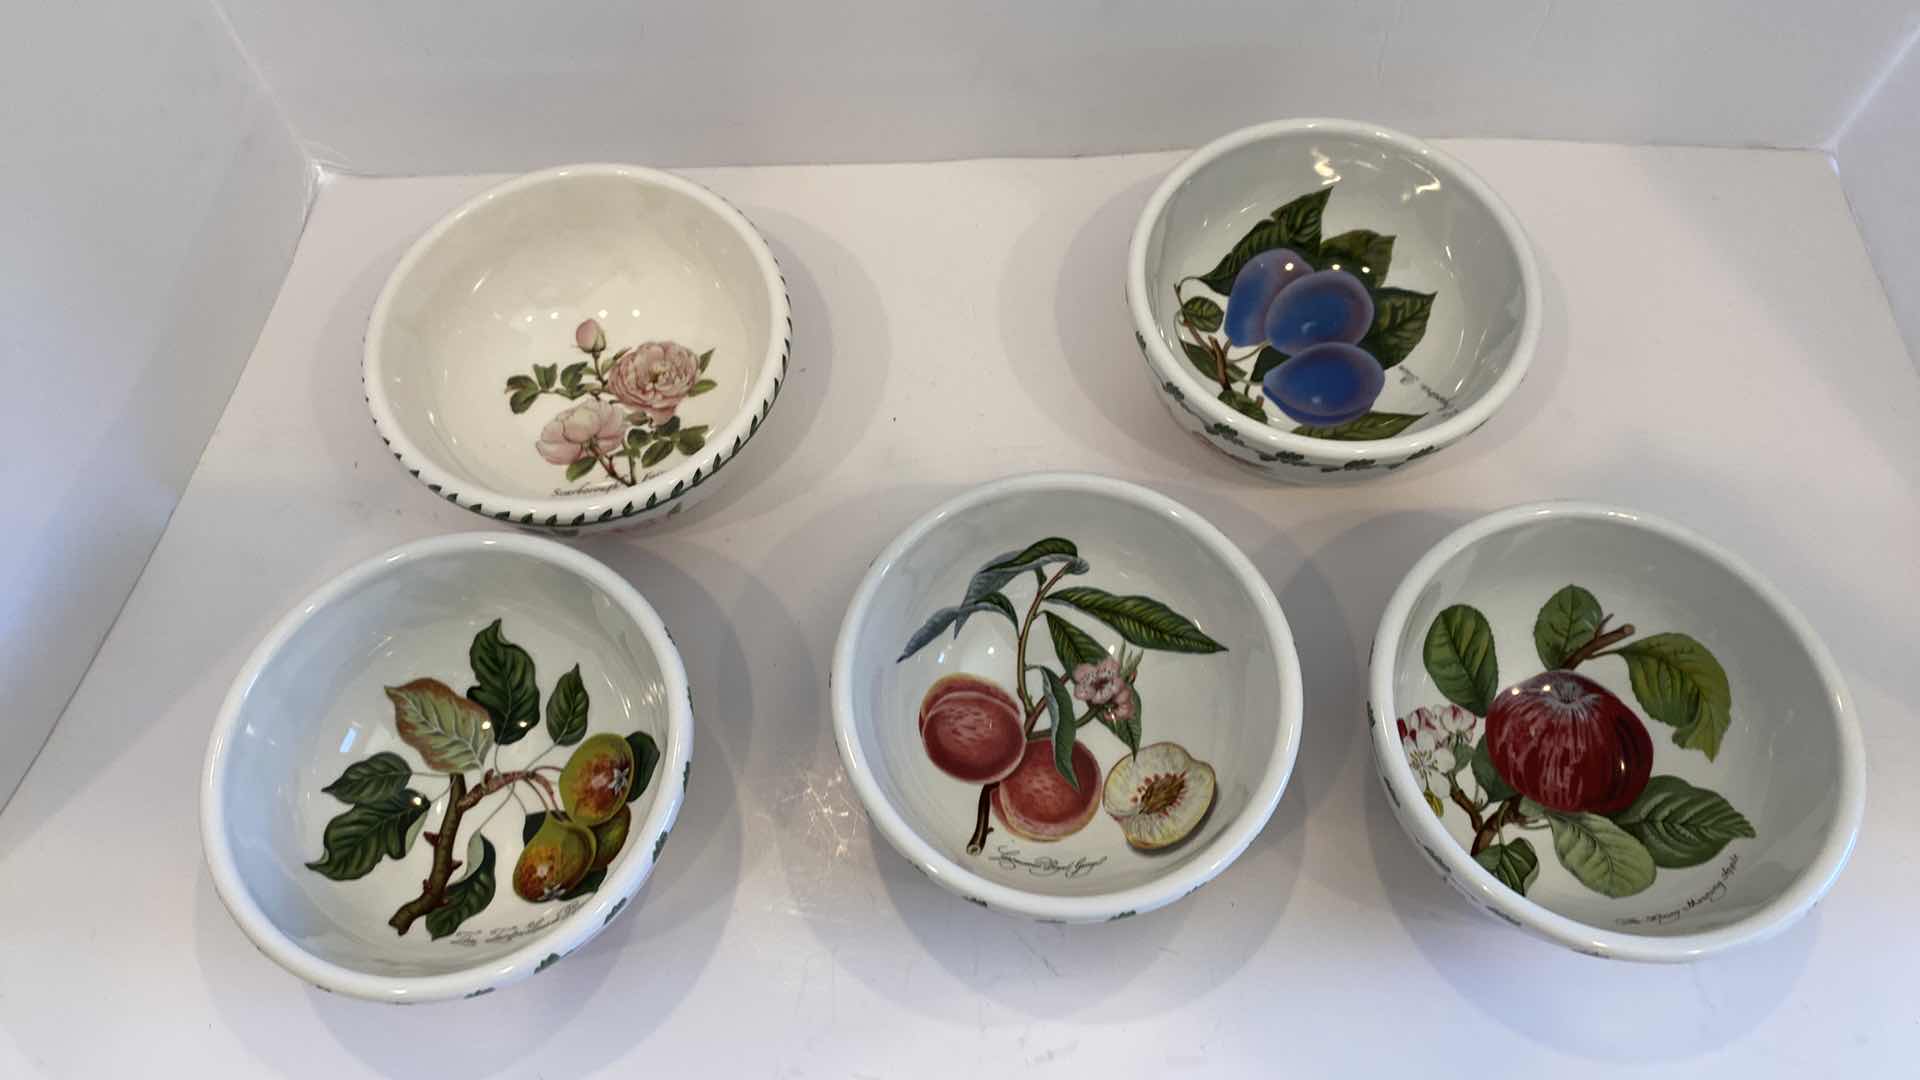 Photo 5 of POMONA PORT MADE IN ENGLAND CEREAL BOWLS AND BOTANIC GARDEN PLATES BY SUSAN WILLIAMS ELLIS